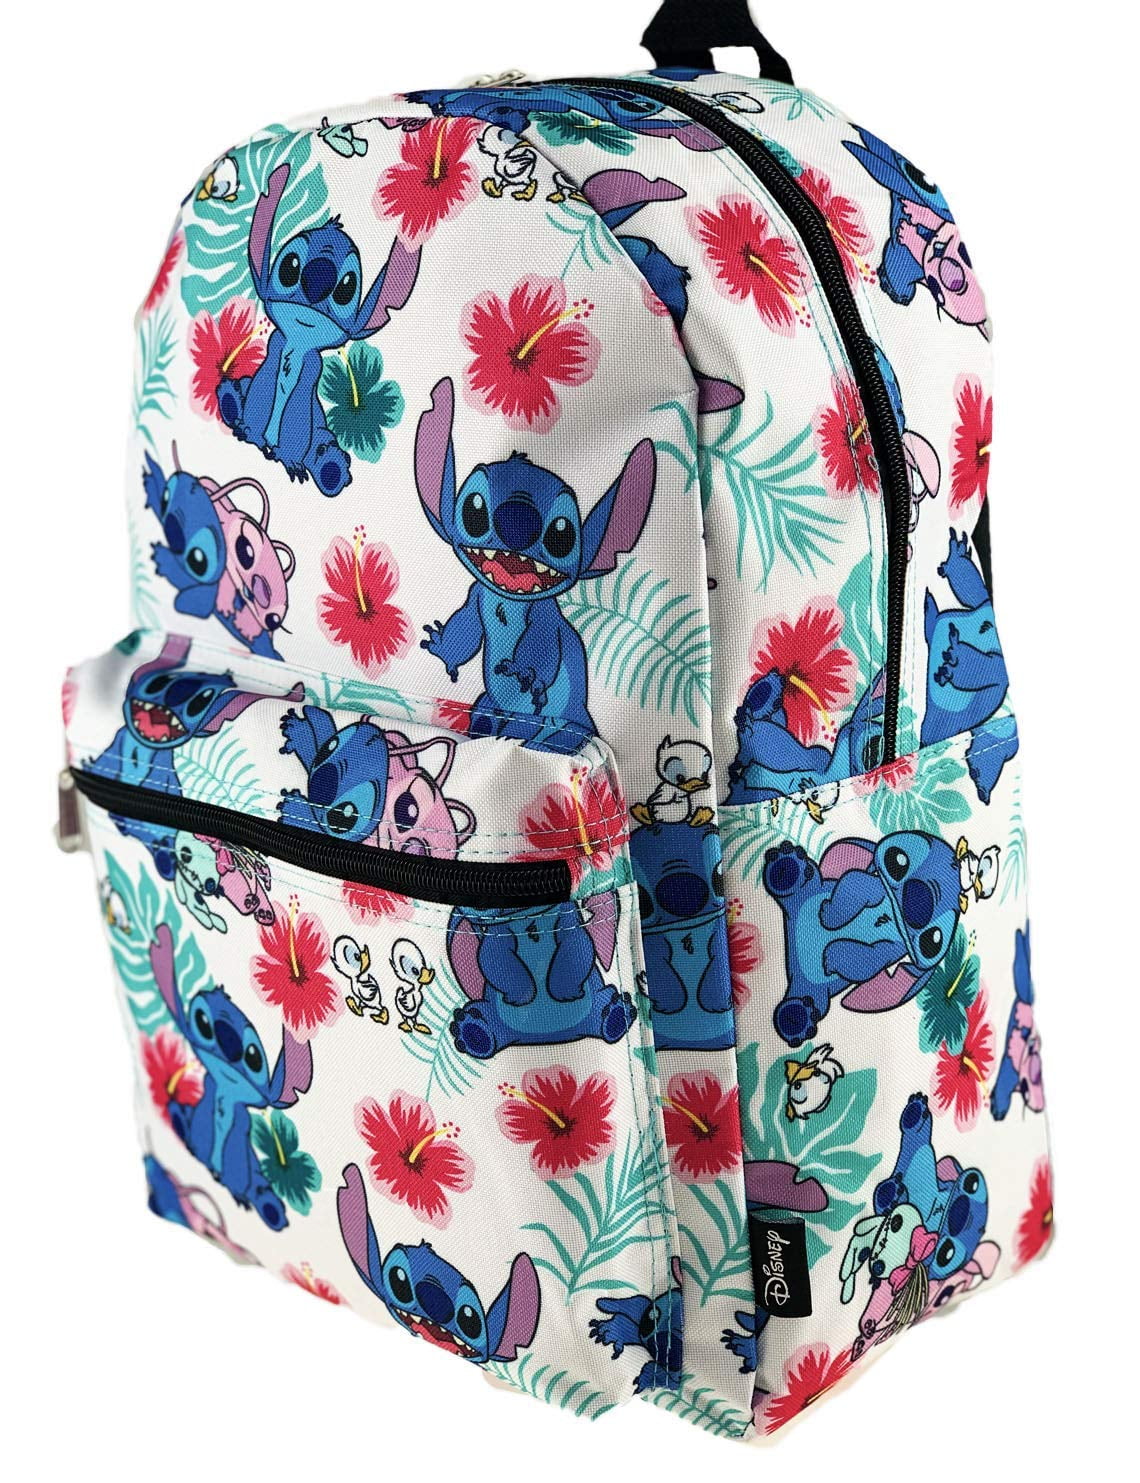 Lilo and Stitch 16 Inch Allover Print Backpack with Laptop Sleeve 